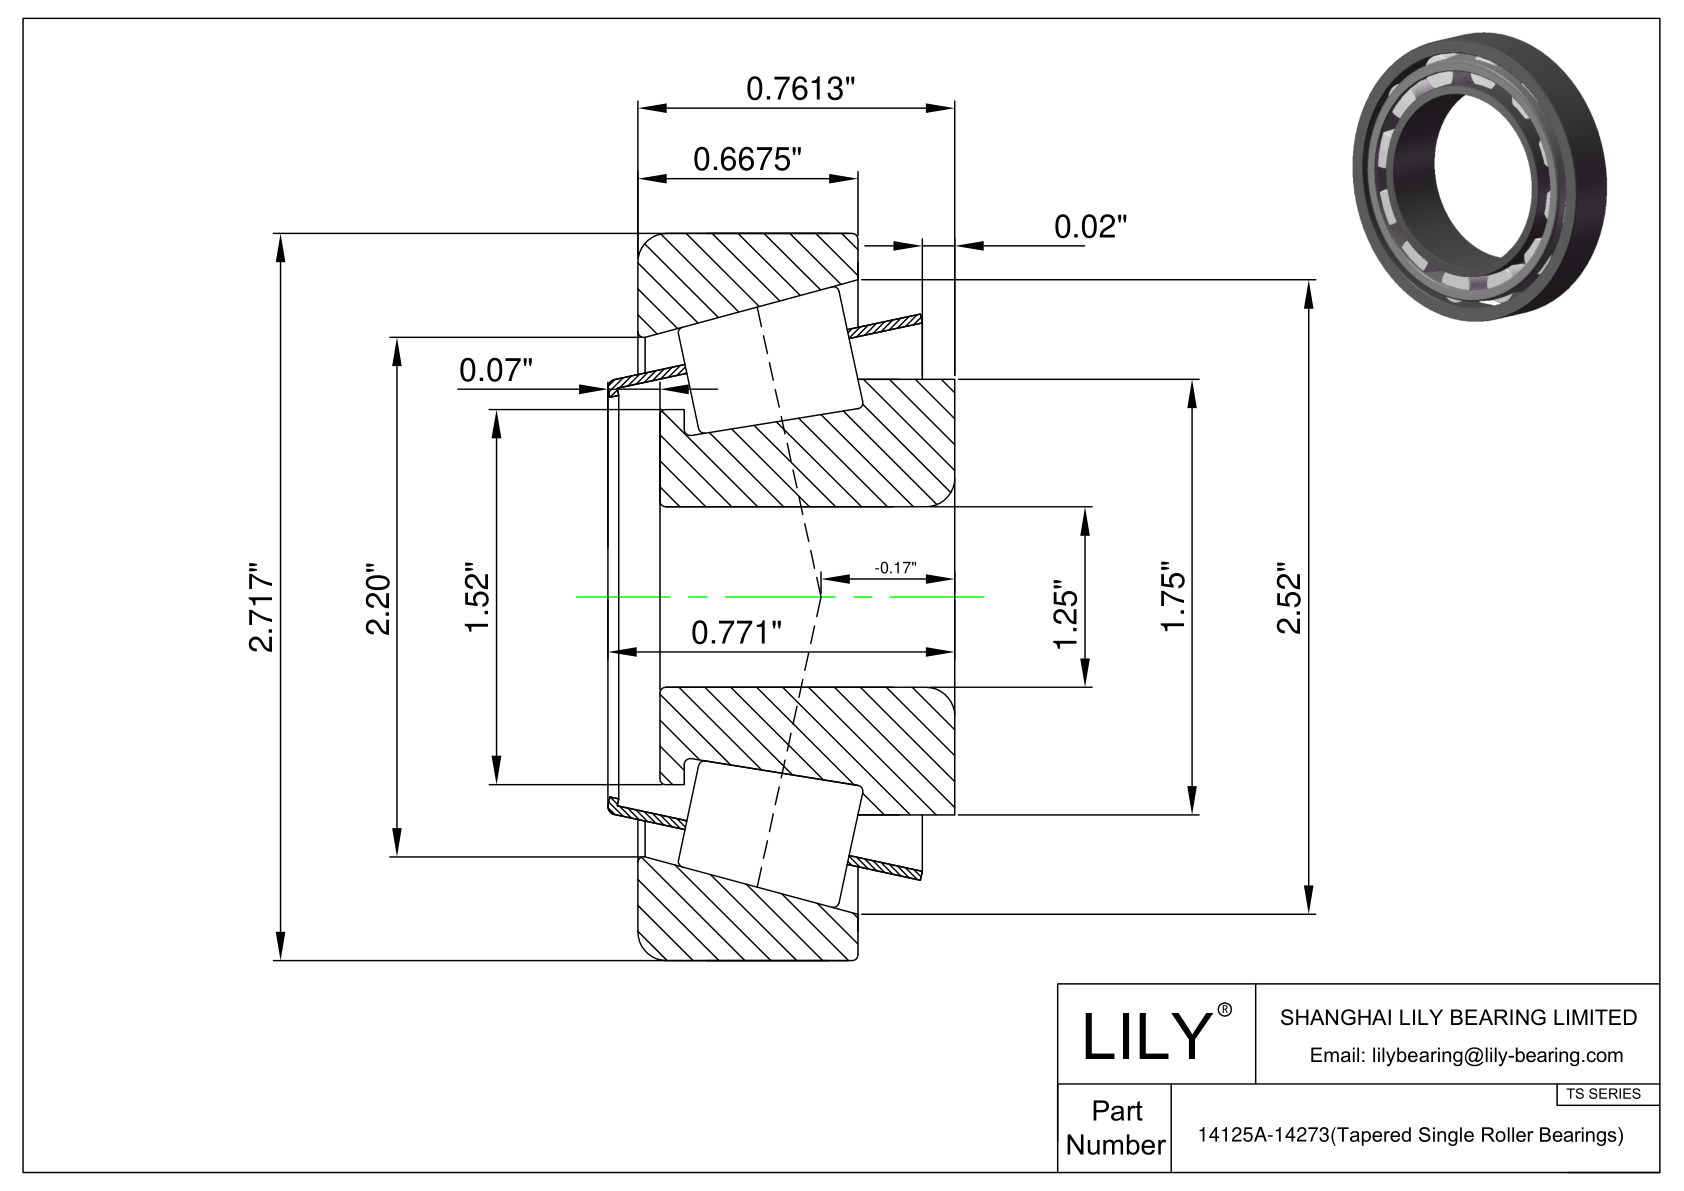 14125A-14273 TS (Tapered Single Roller Bearings) (Imperial) cad drawing